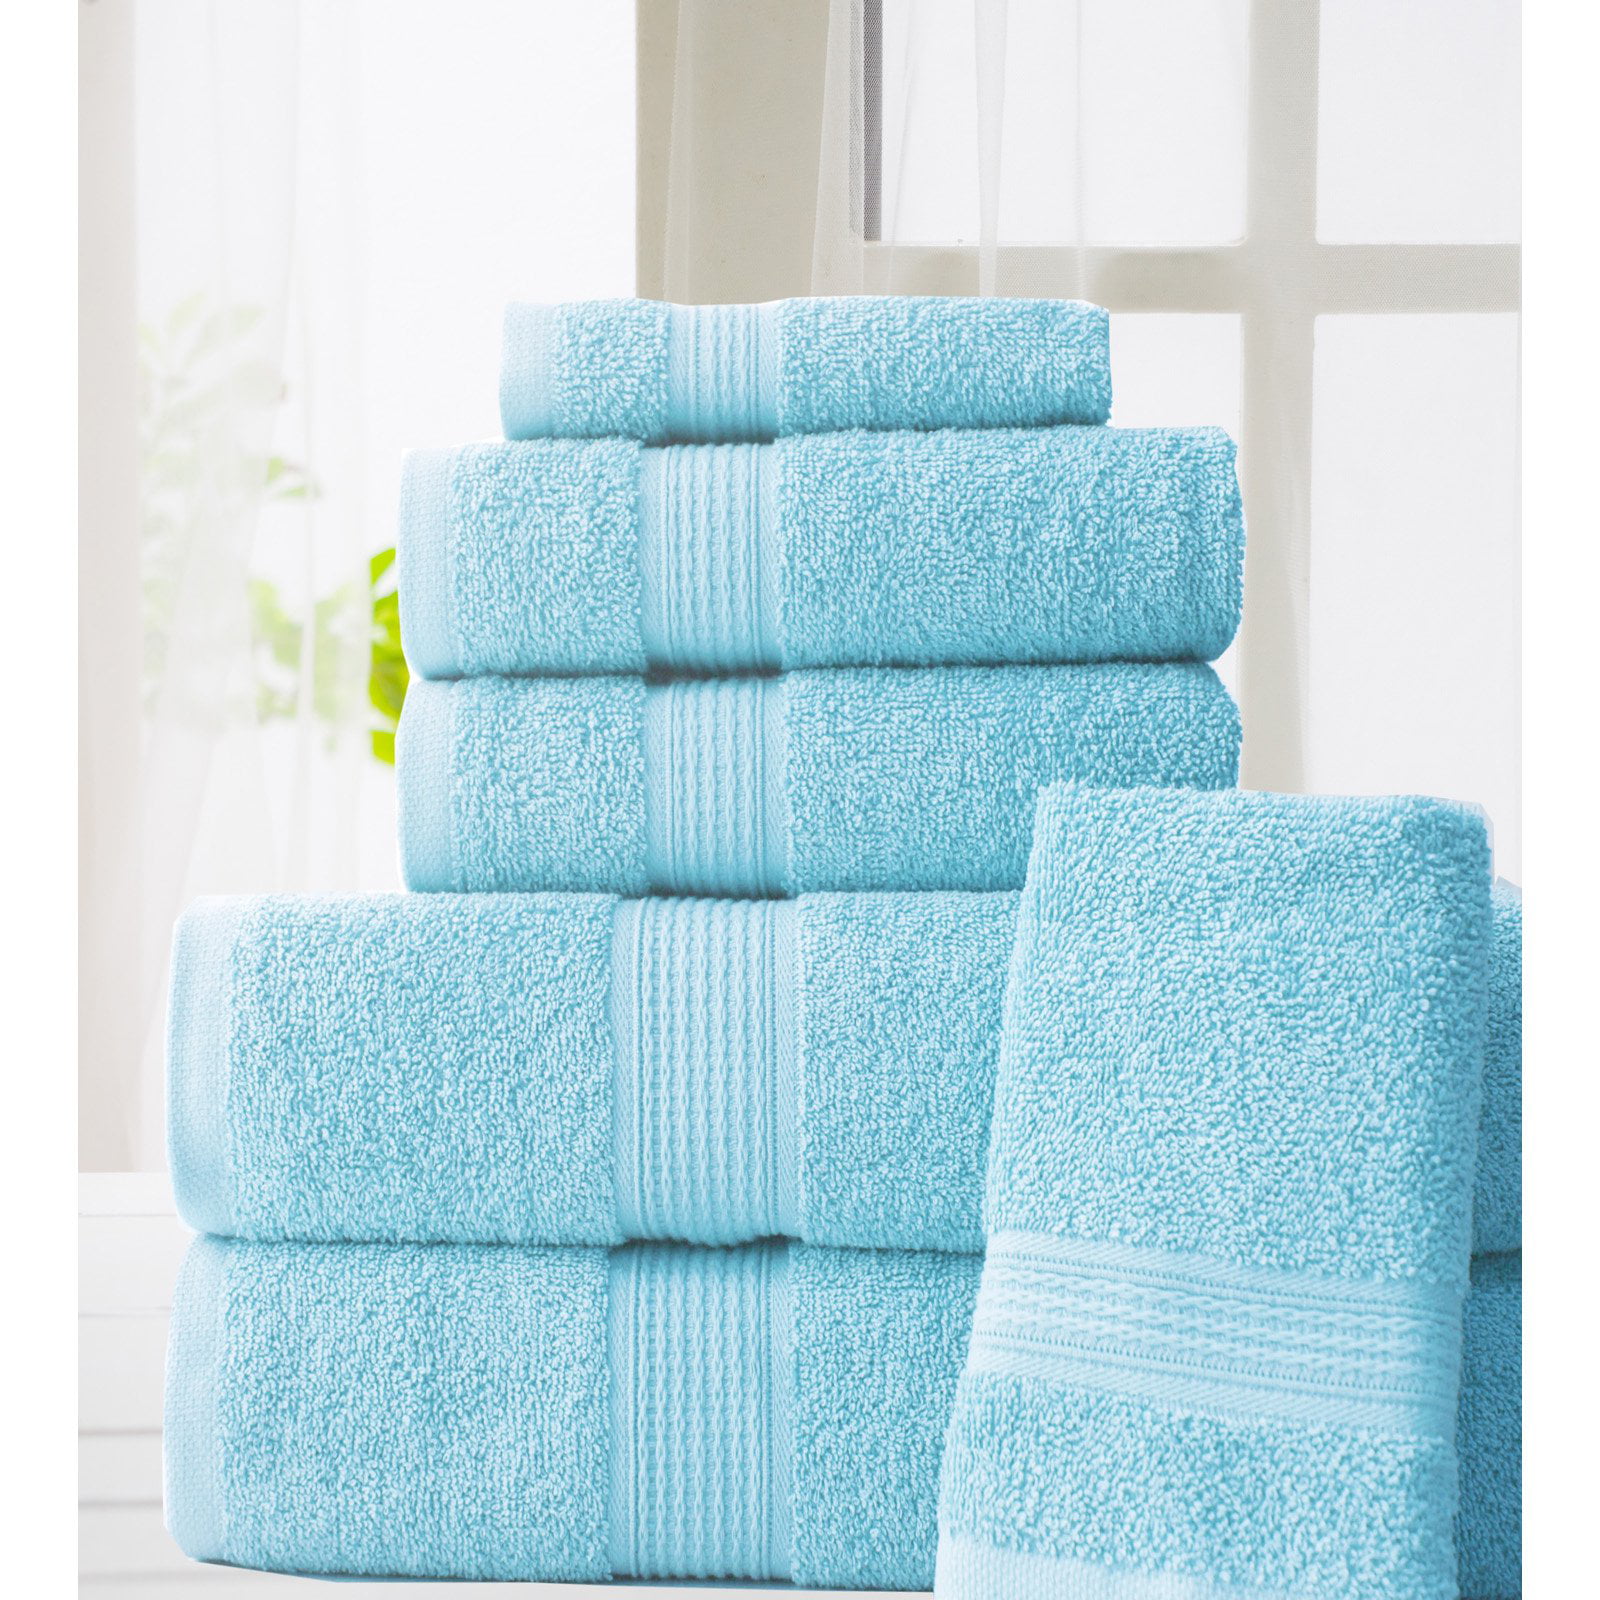  Welspun Basics Luxurious 100% Hygro Cotton 6 Piece Towel Set, Yellow, Quick Dry, Absorbent, Durable, Softer & Lofter Wash After Wash, Sustainable, 600 GSM